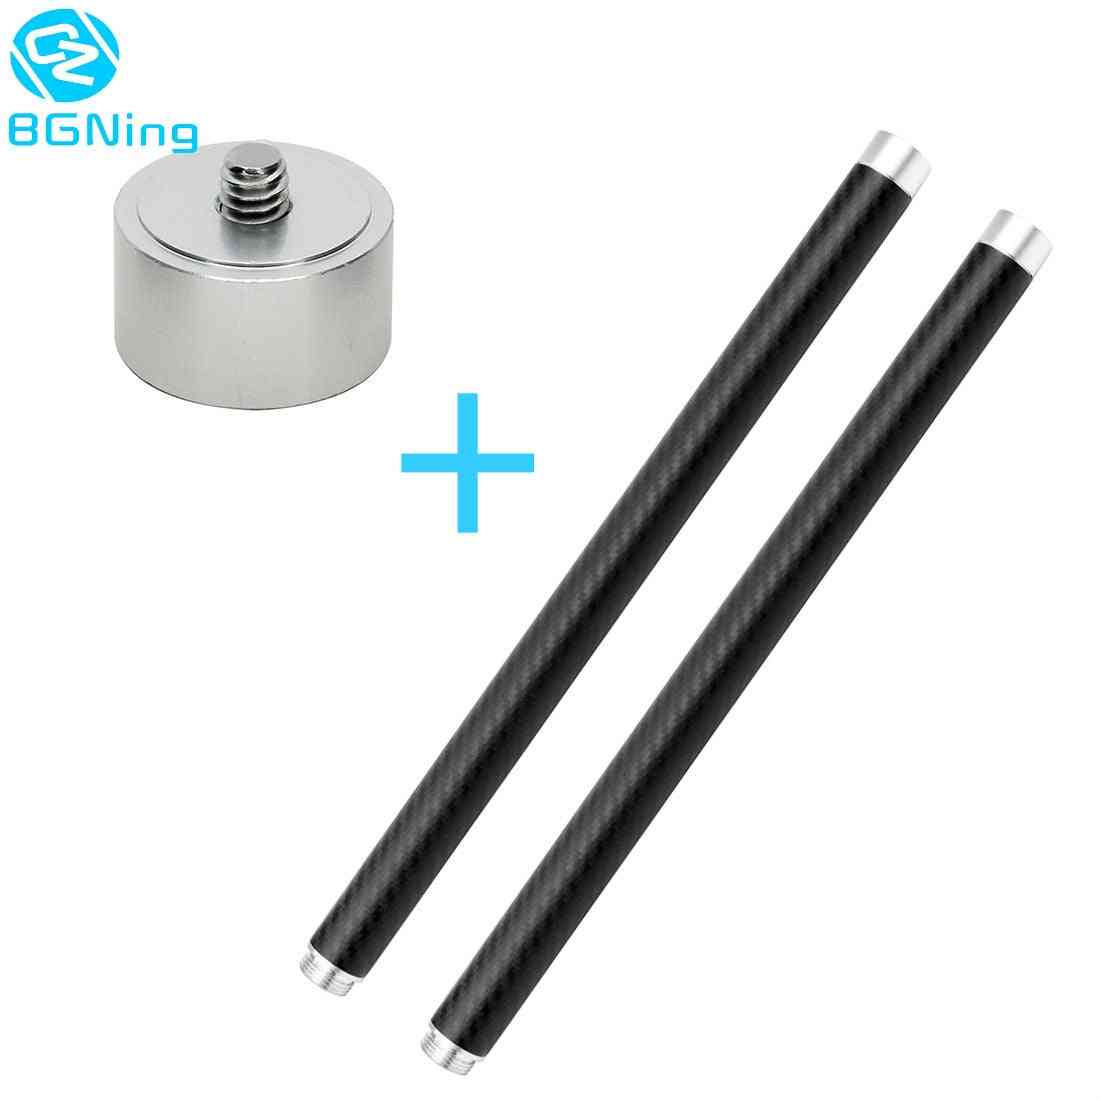 Carbon Fiber Extension Rod Bar Reach Pole Arm Converter Adapter For Dji Mobile 2/smooth 4 Handheld Gimbal With 1/4